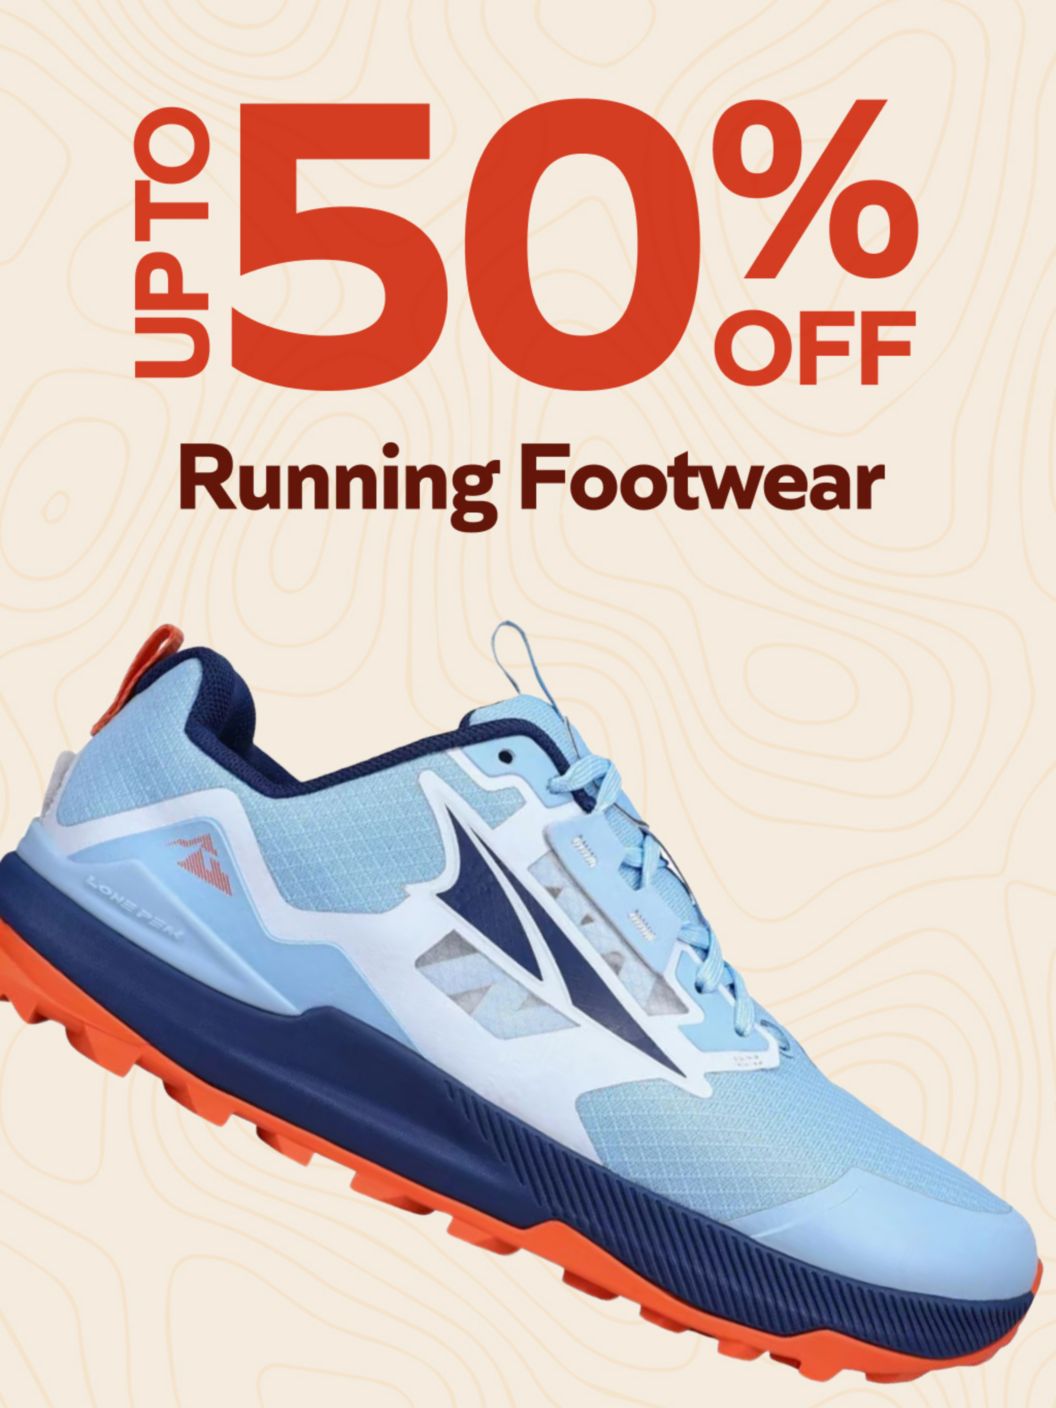 Running footwear up to 50% off 